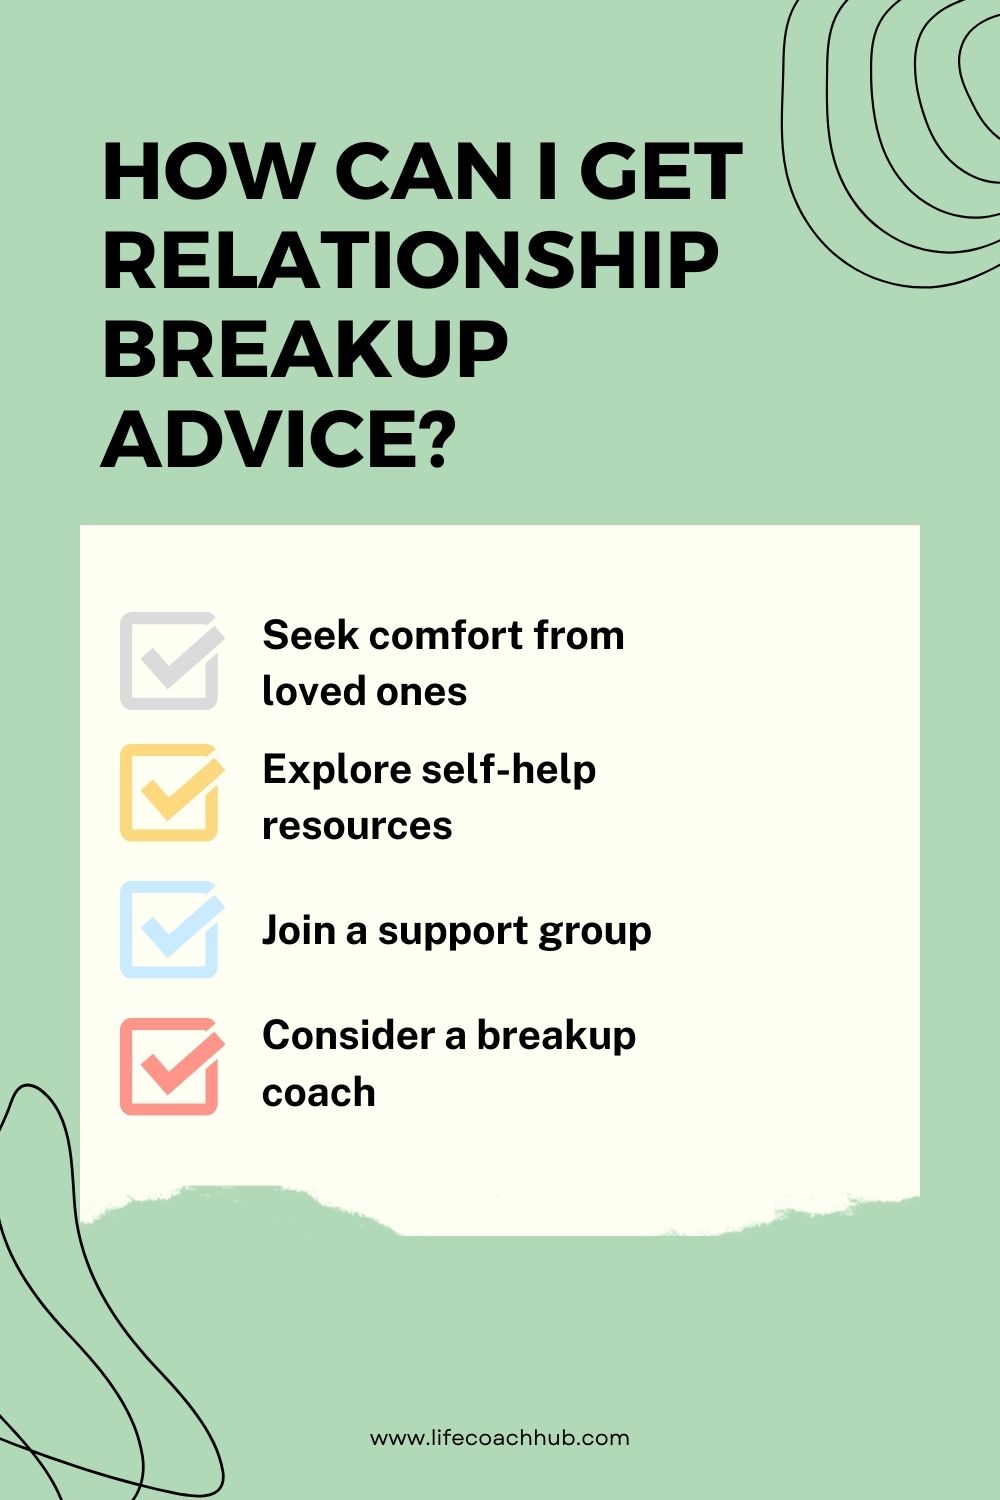 How can I get relationship breakup advice?